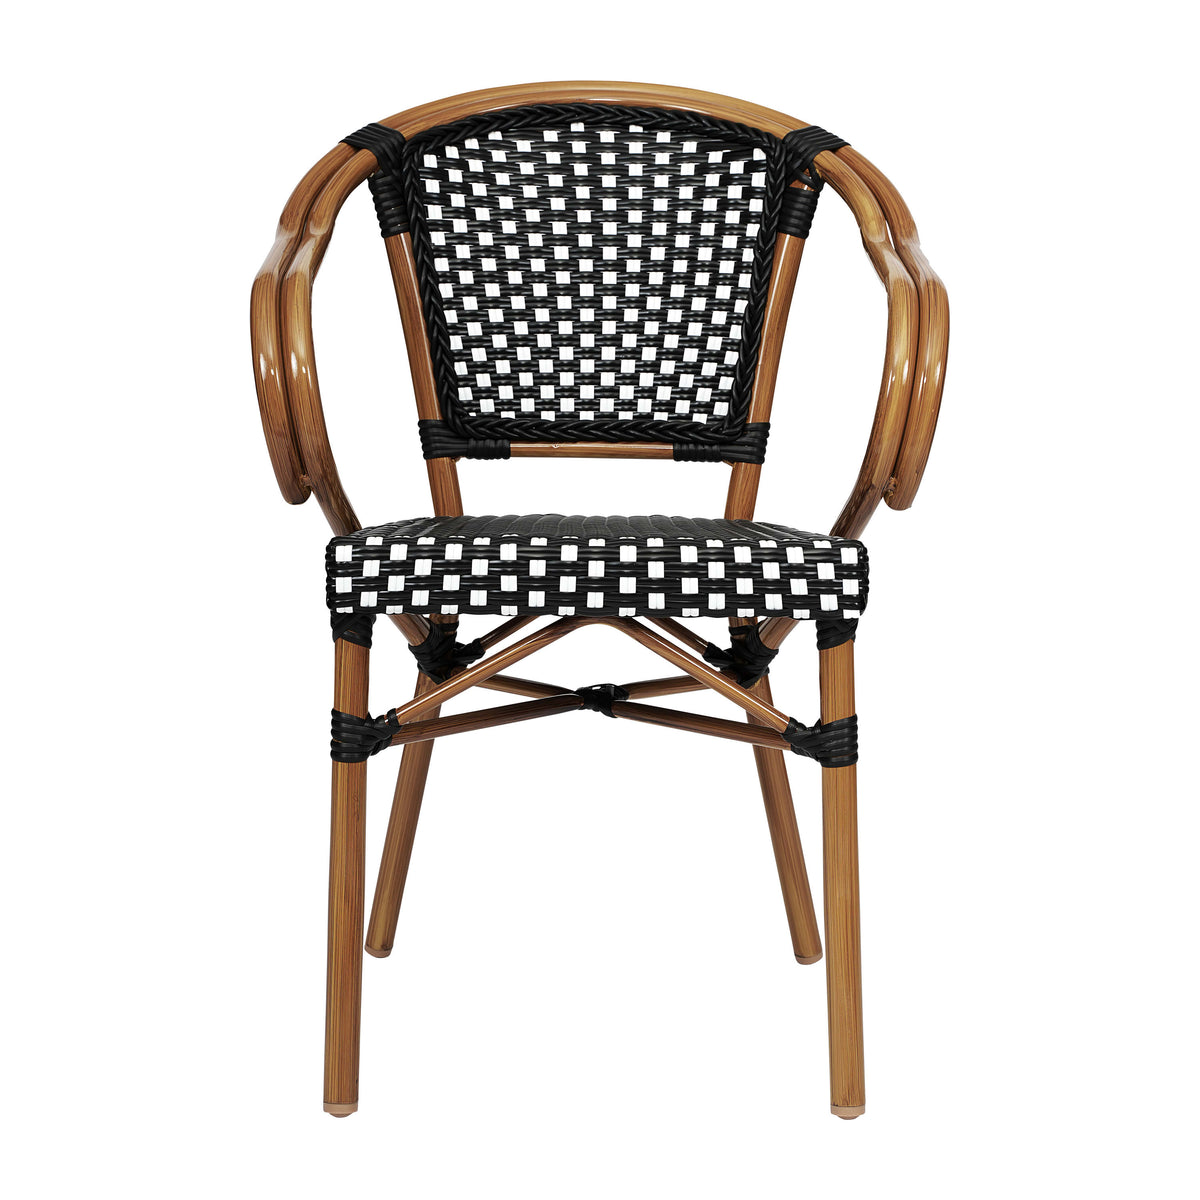 Black & White/Natural Frame |#| All-Weather Commercial Paris Chair with Bamboo Print Metal Frame-Black/White